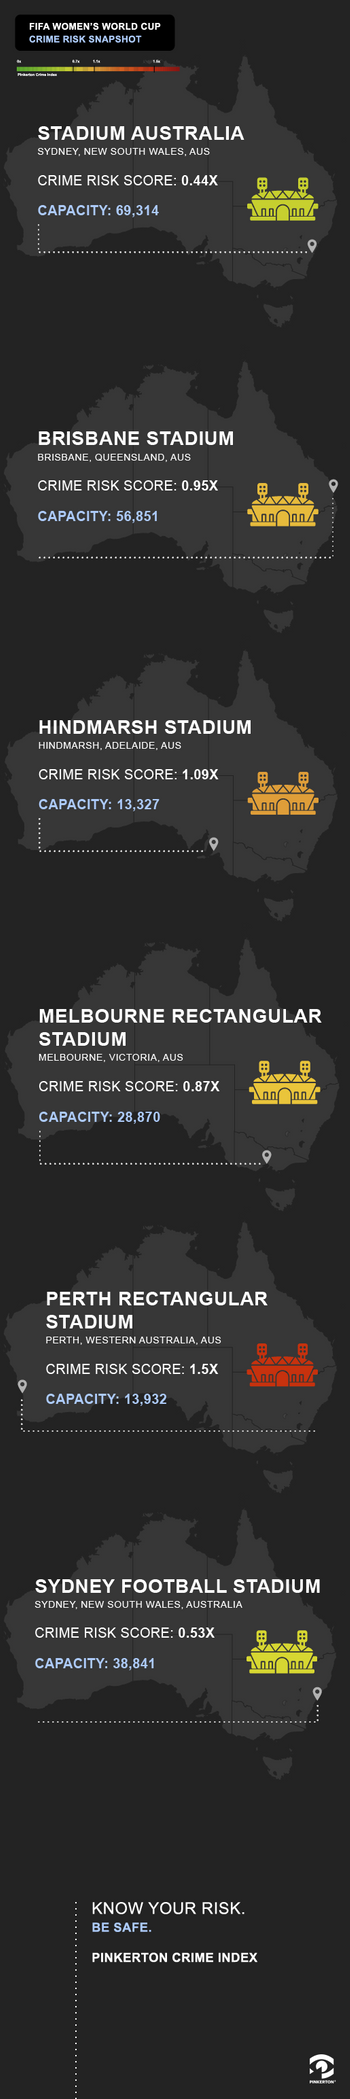 Graphic showing crime risk snapshots for soccer stadiums in Australia and New Zealand